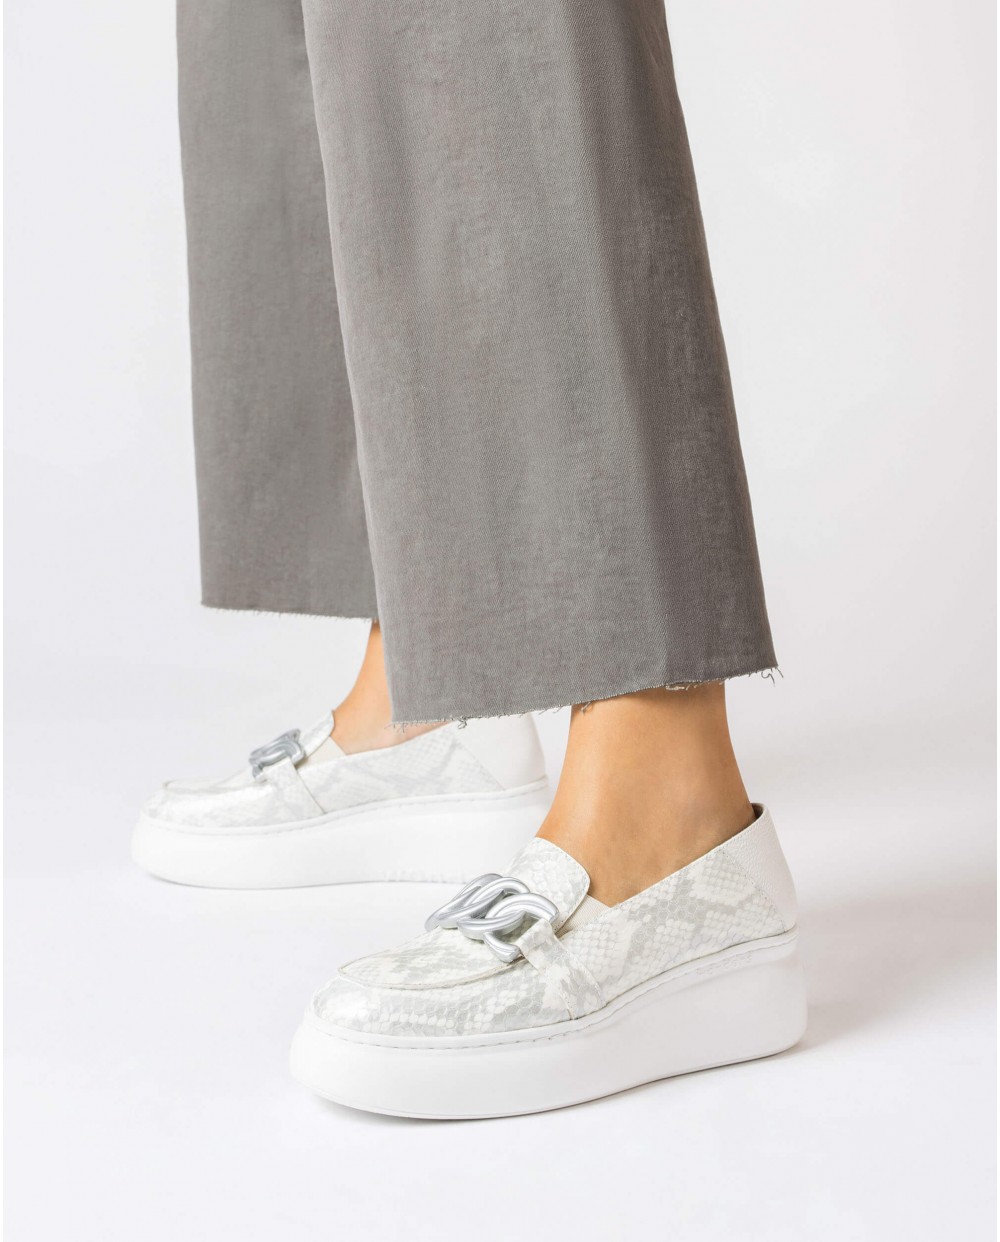 Wonders-Loafers-White Begin Moccasin